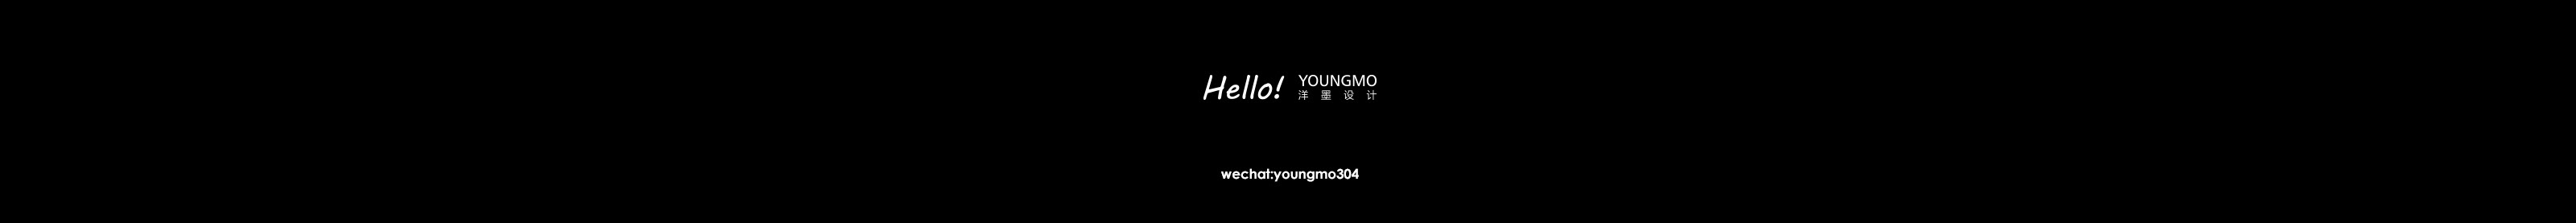 young mo's profile banner